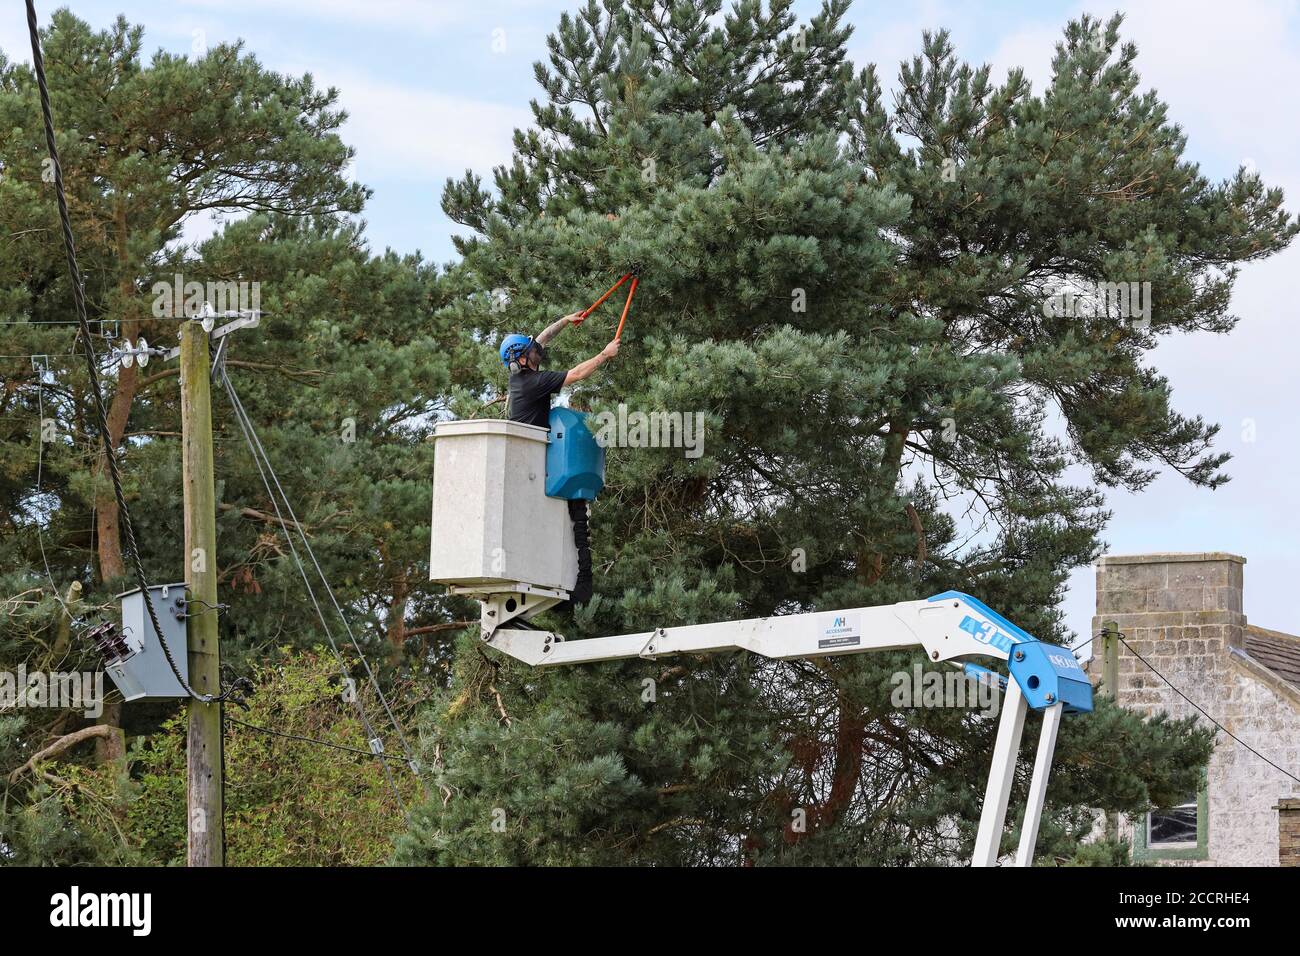 Amey worker carrying out vegetation management for Northern Power Grid on trees surrounding power lines, County Durham, UK Stock Photo